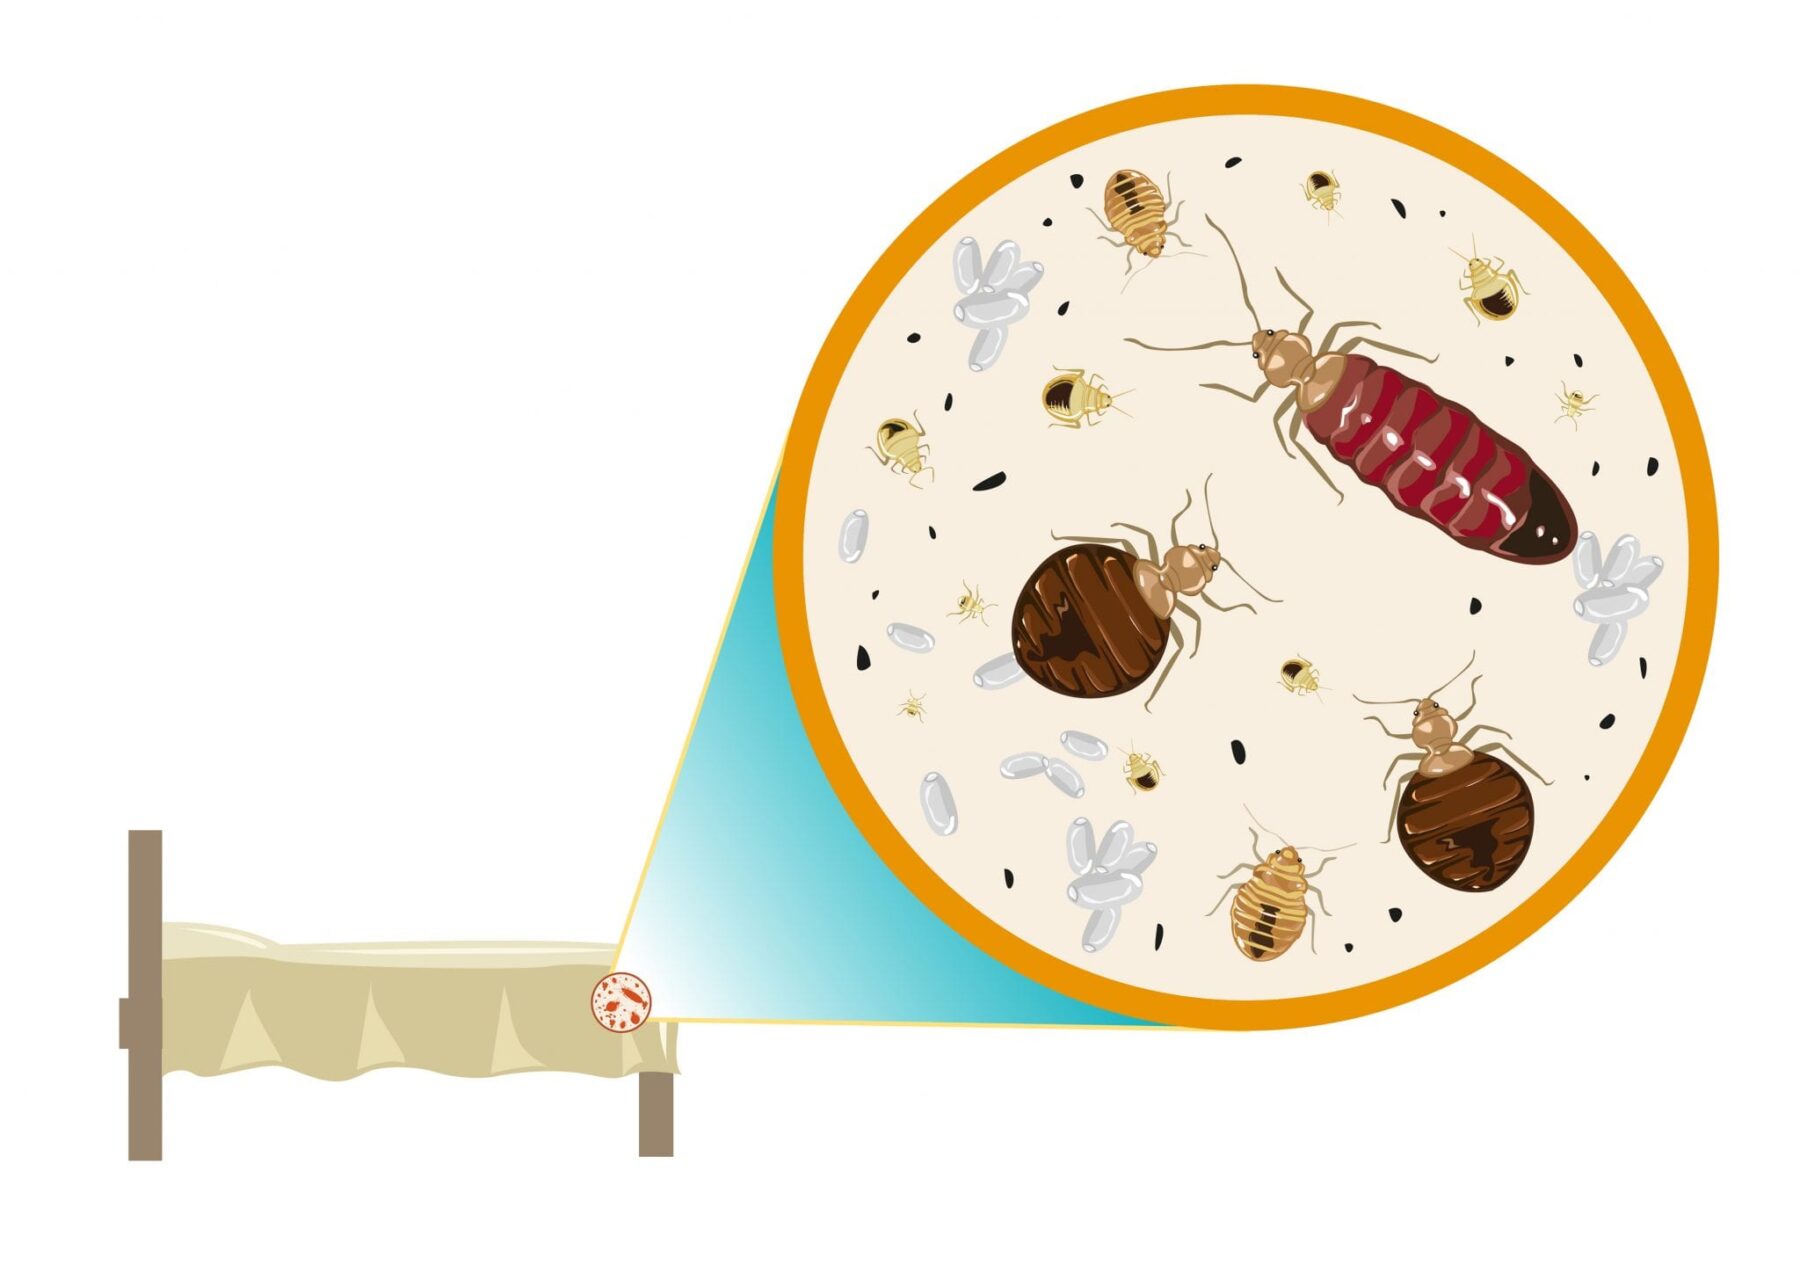 Illustration of a small brown bed with white covers and a small red circle with red dots inside, to the right is a large circle showing a zoomed in version of the circle on the bed, with bed bugs in various stages of life: egg, nymph stages, and adulthood.